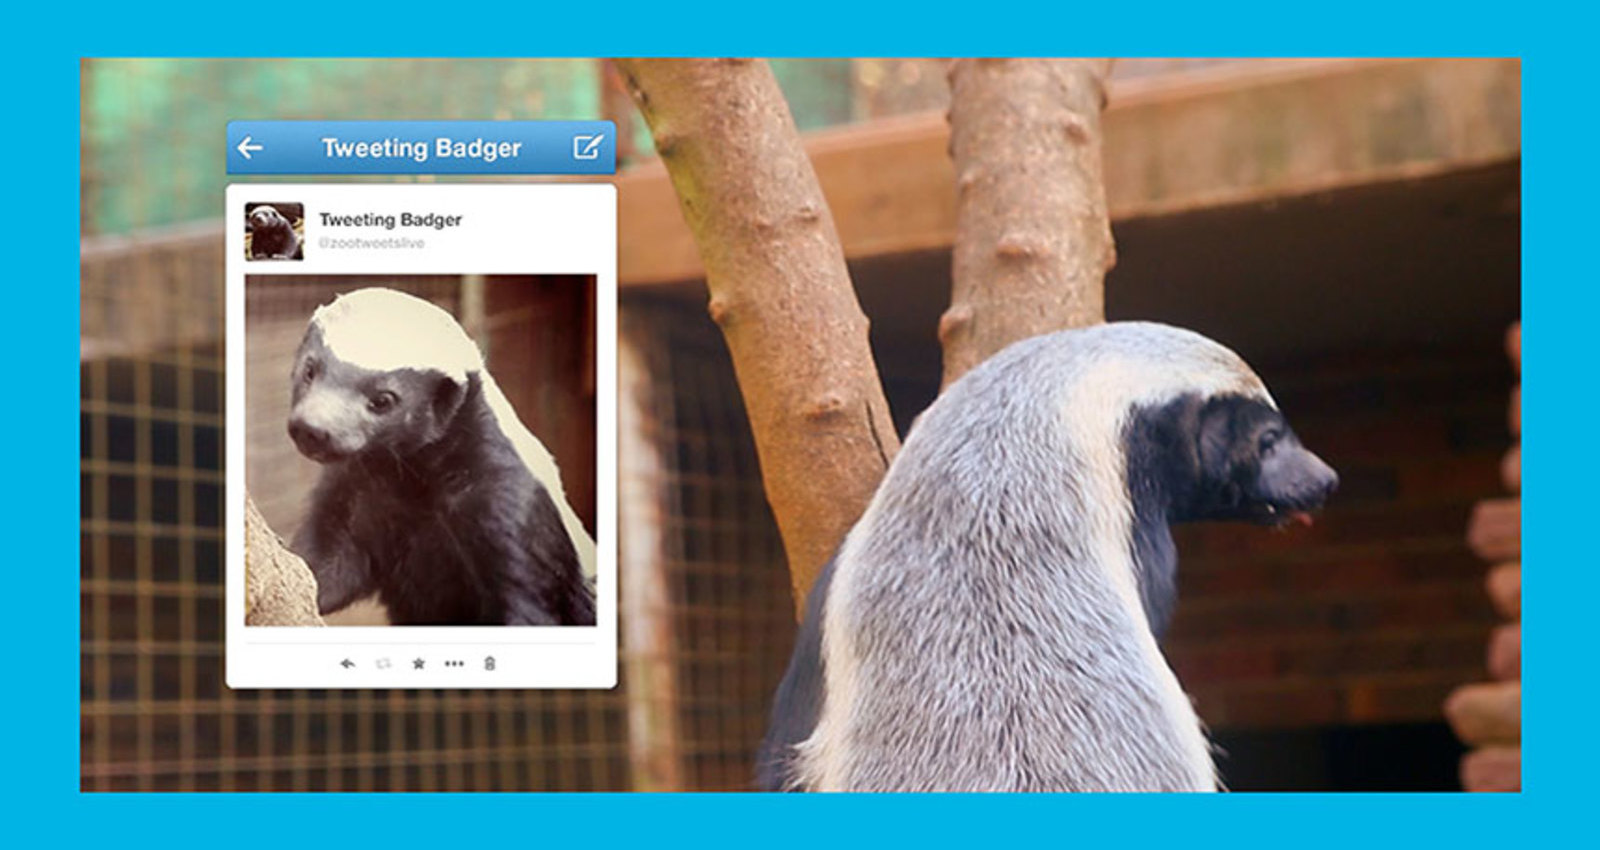 The World's First LIVE Tweeting Honey Badger